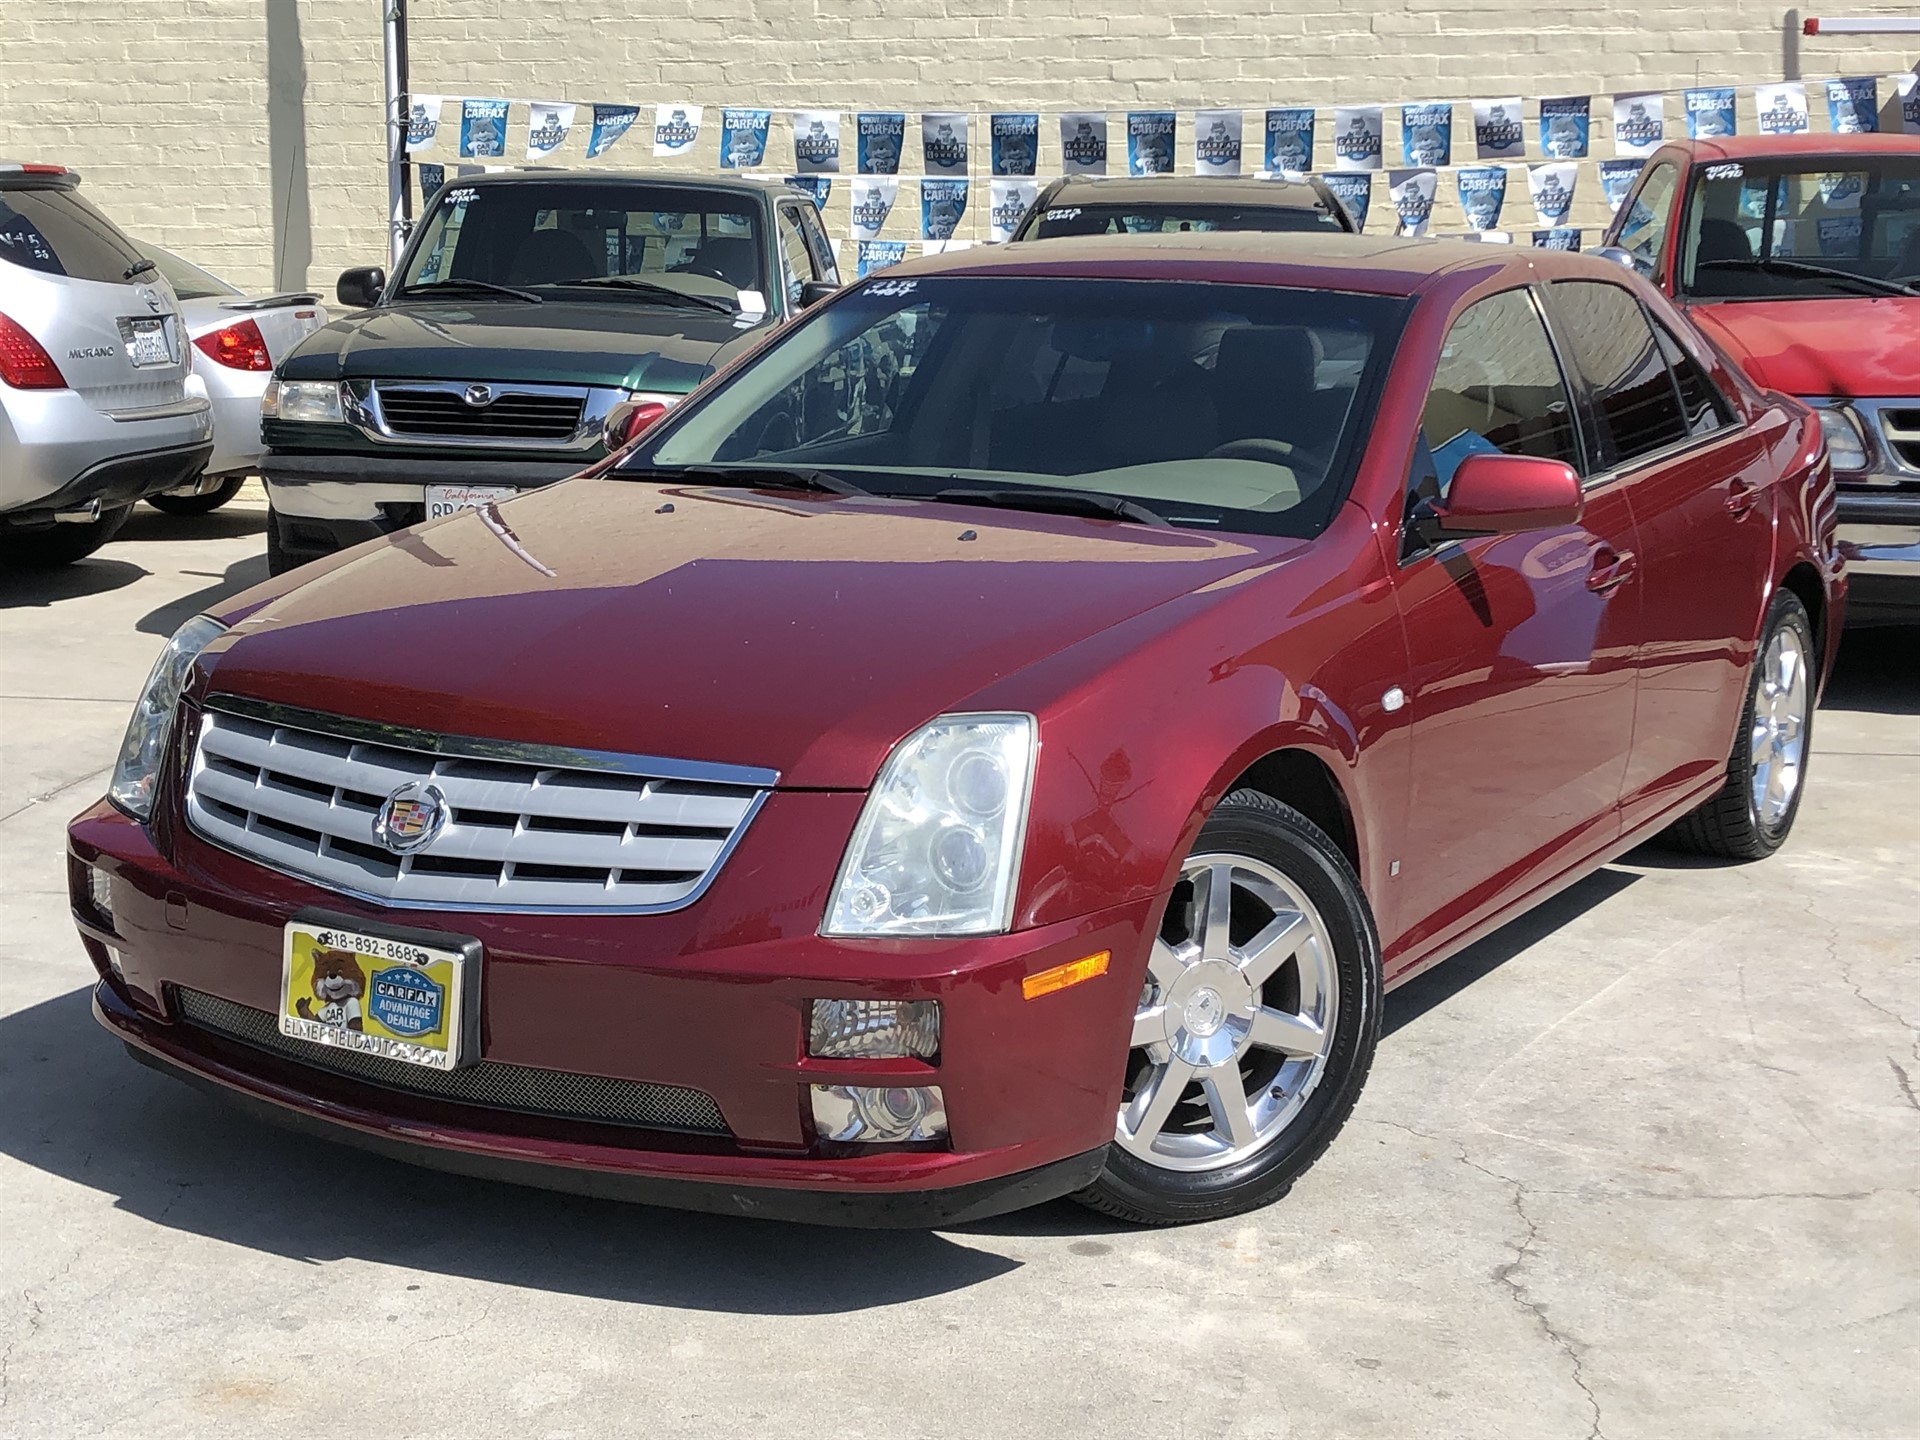 2006 Cadillac STS - Low Miles! Leather! Sunroof! Bose Sound!